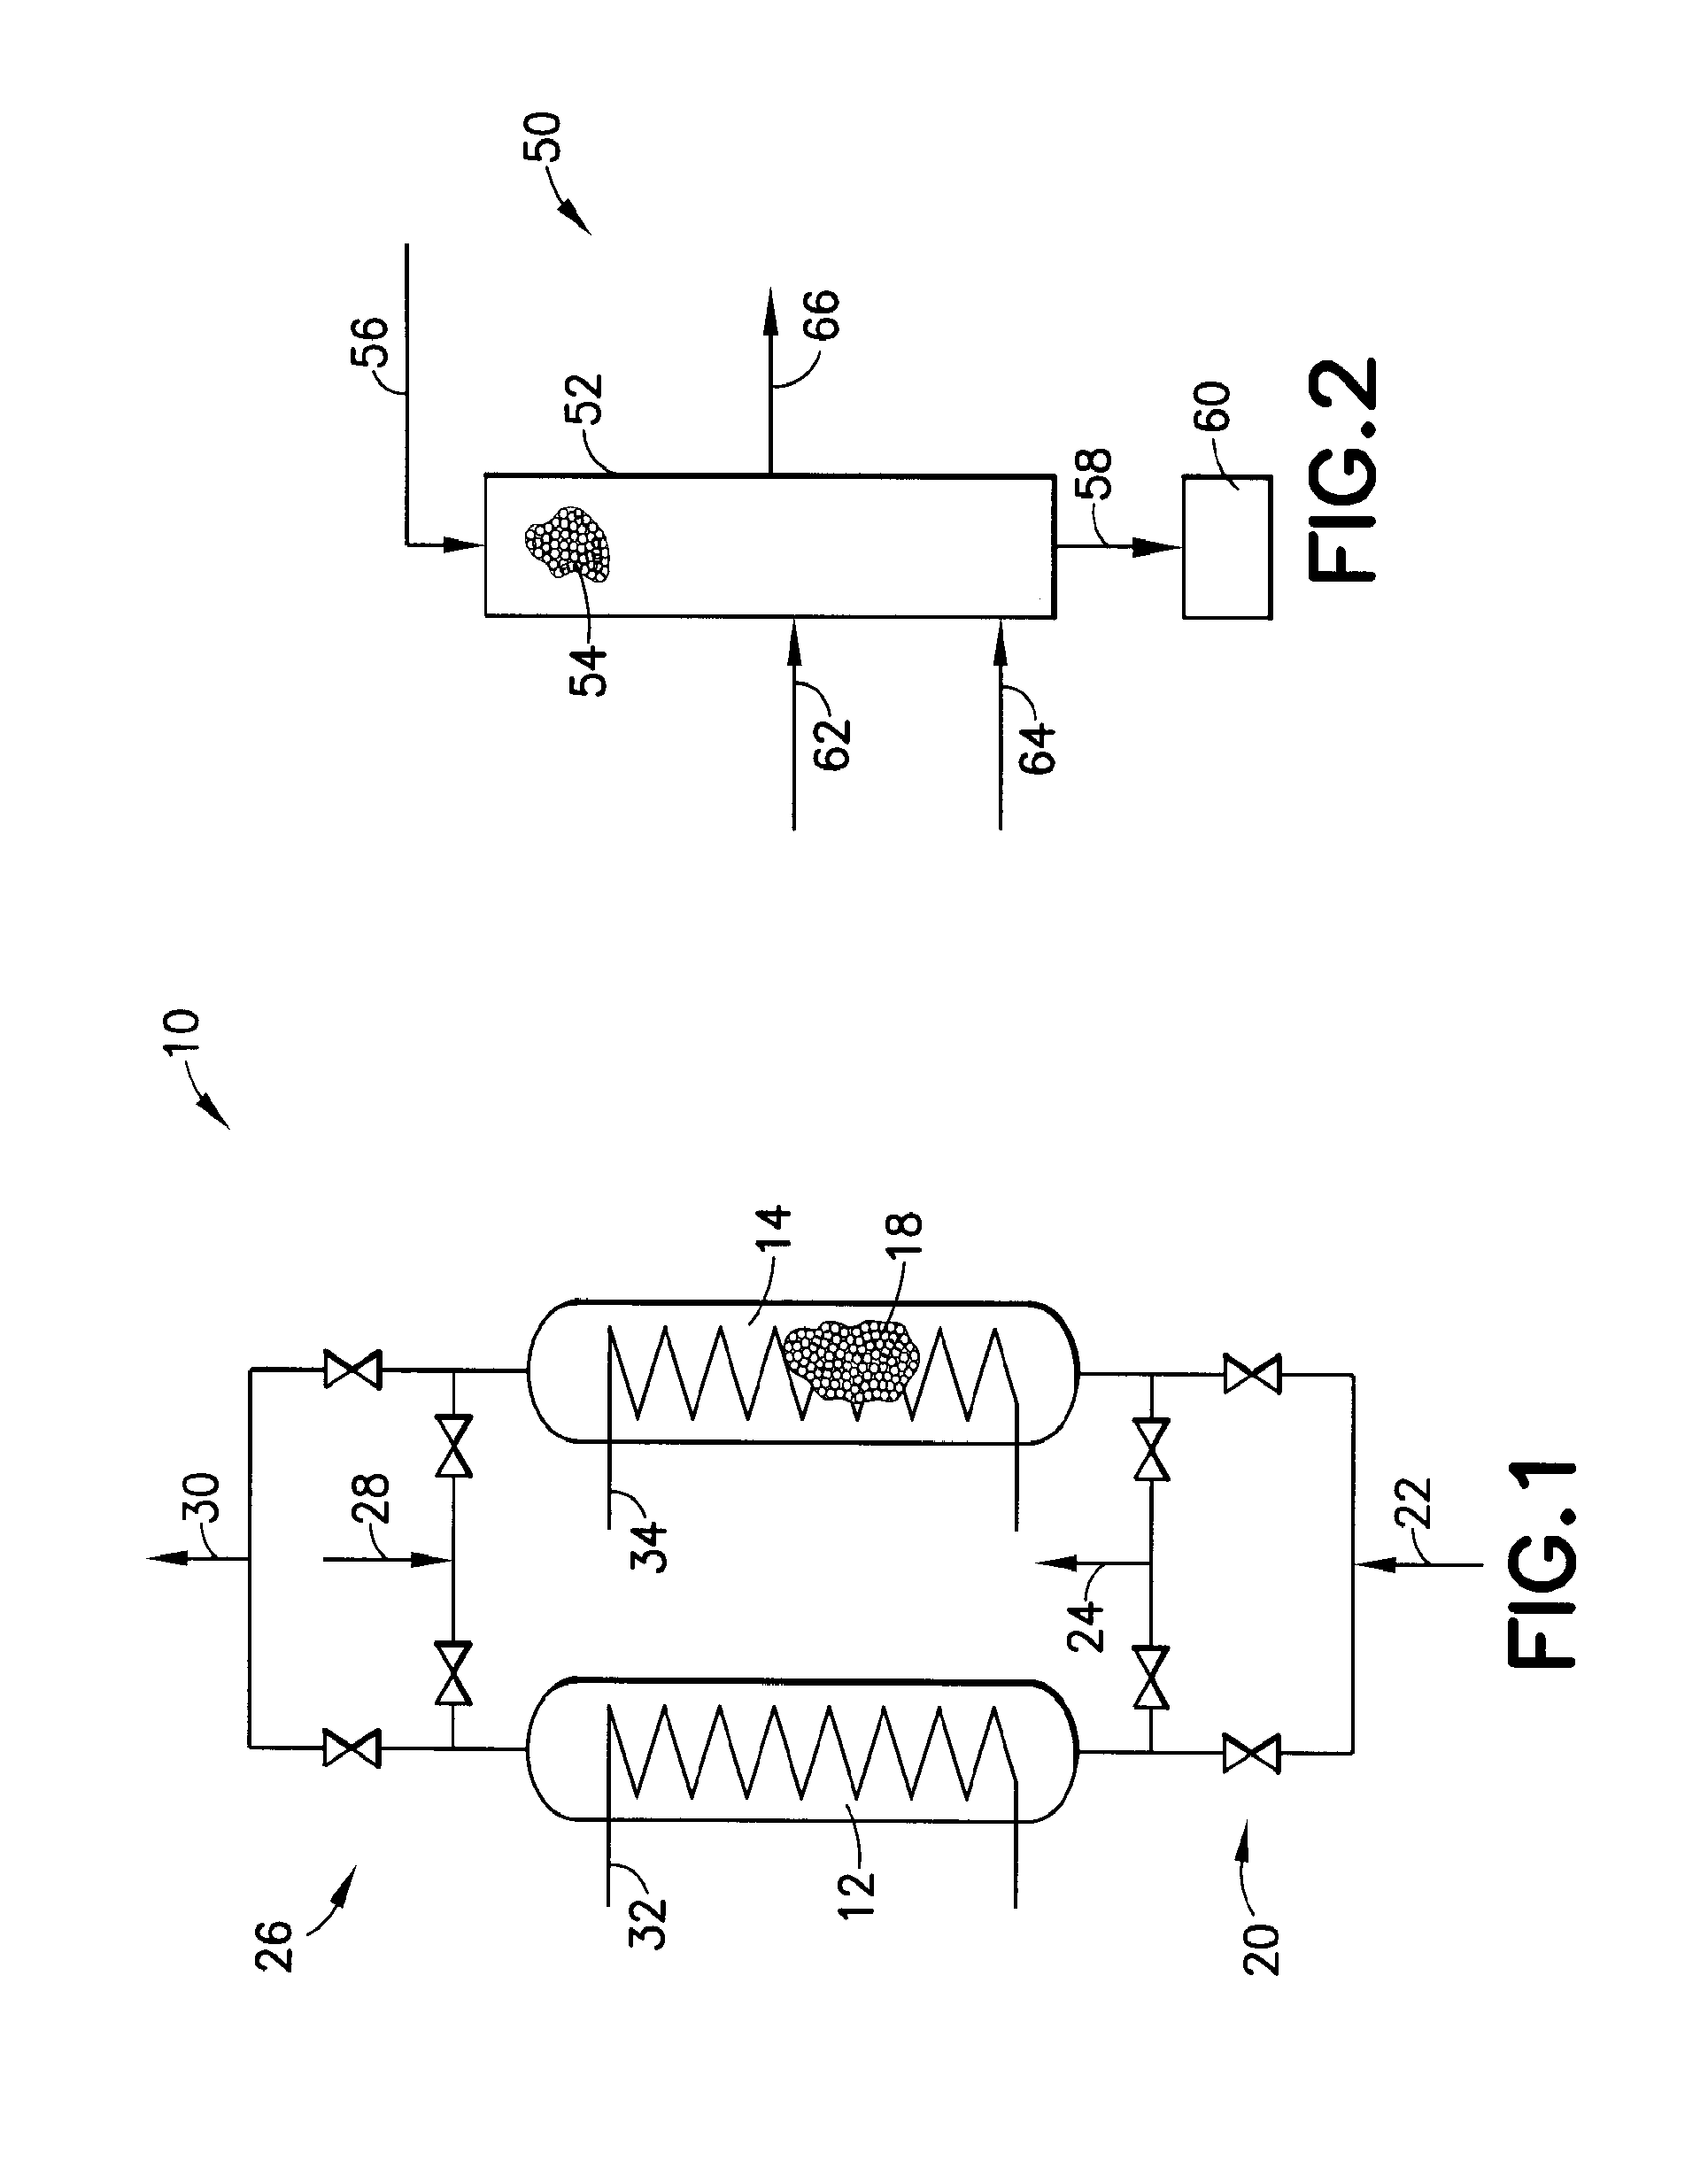 Carbon pyrolyzate adsorbent having utility for co2 capture and methods of making and using the same